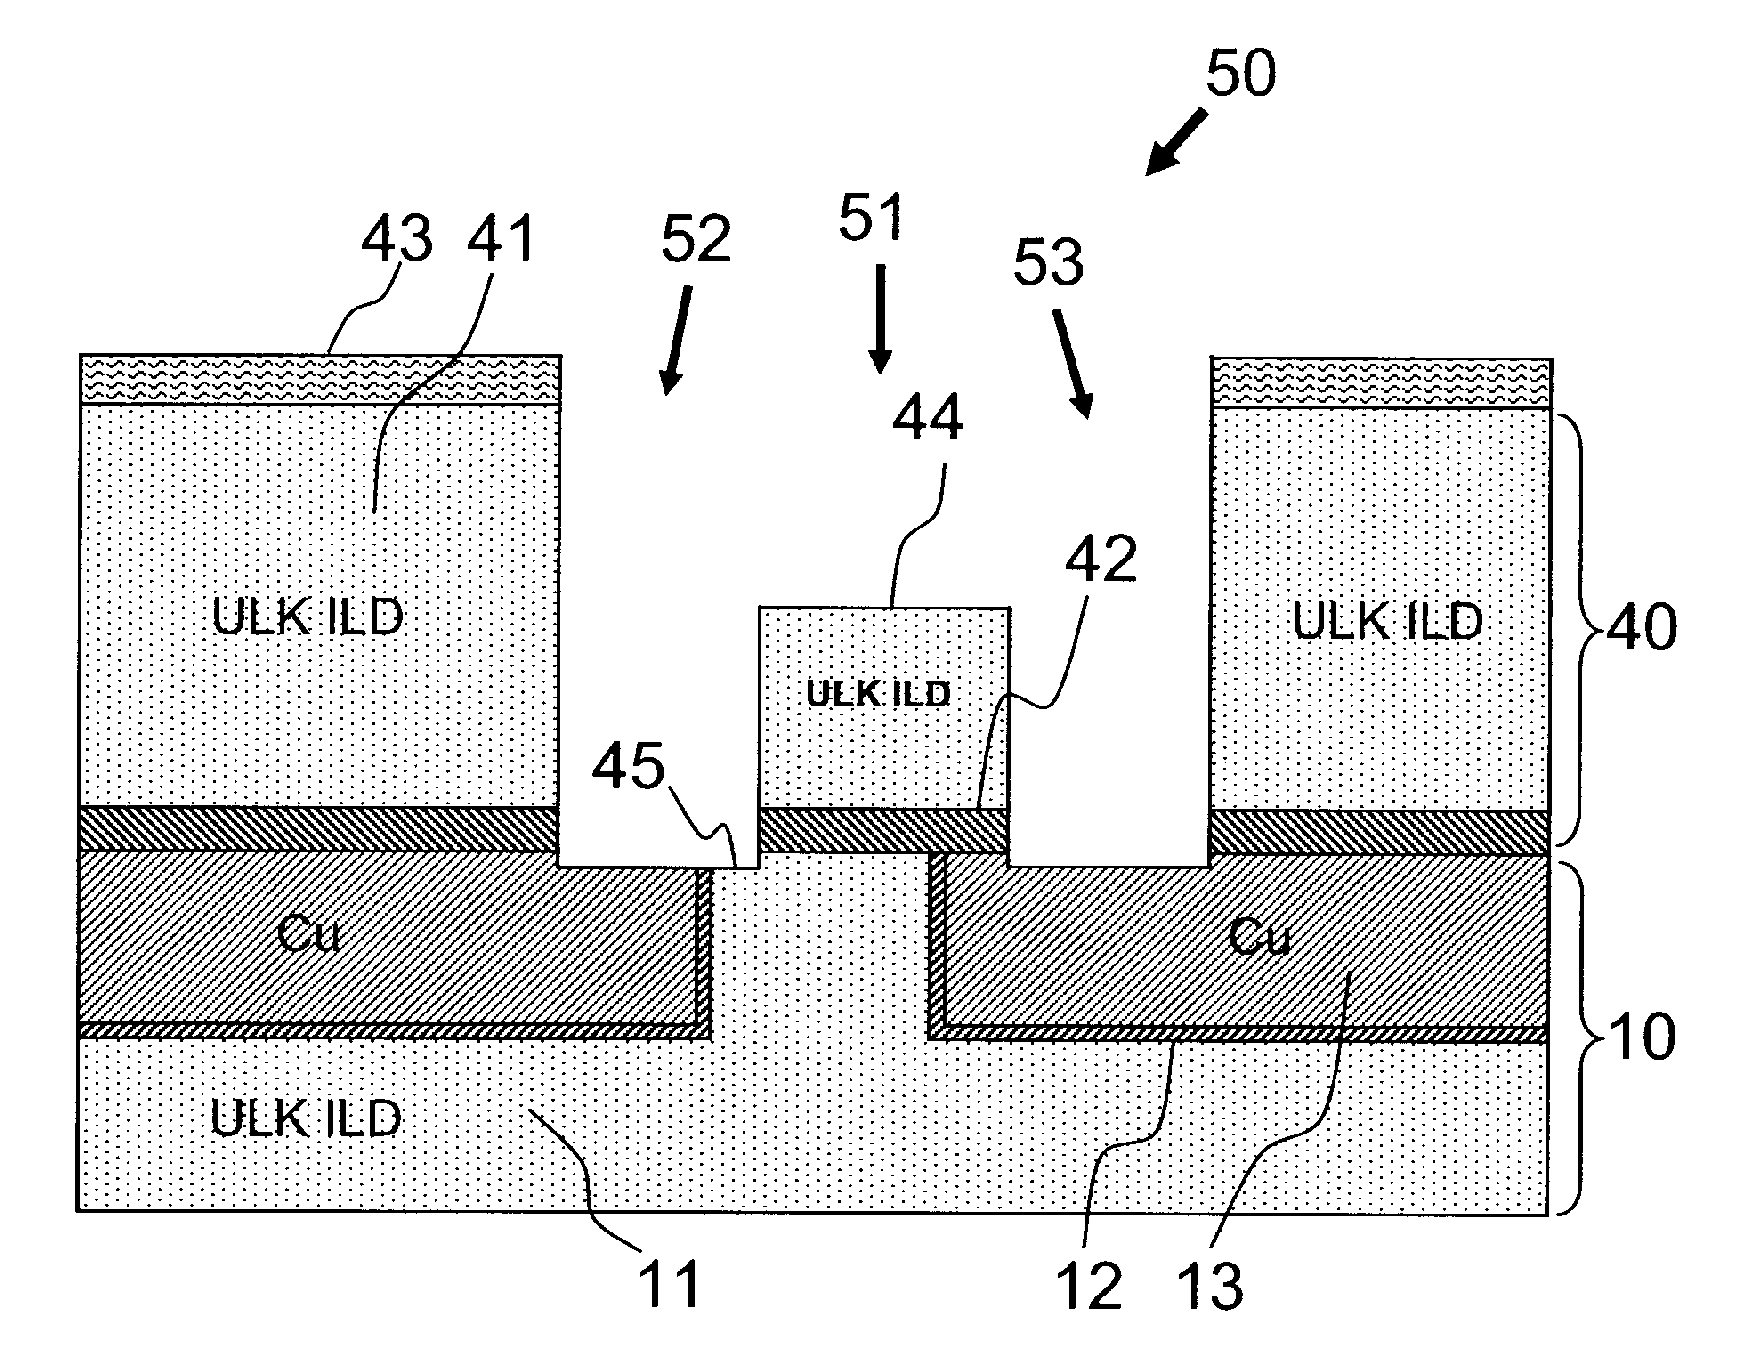 Surface treatment of inter-layer dielectric